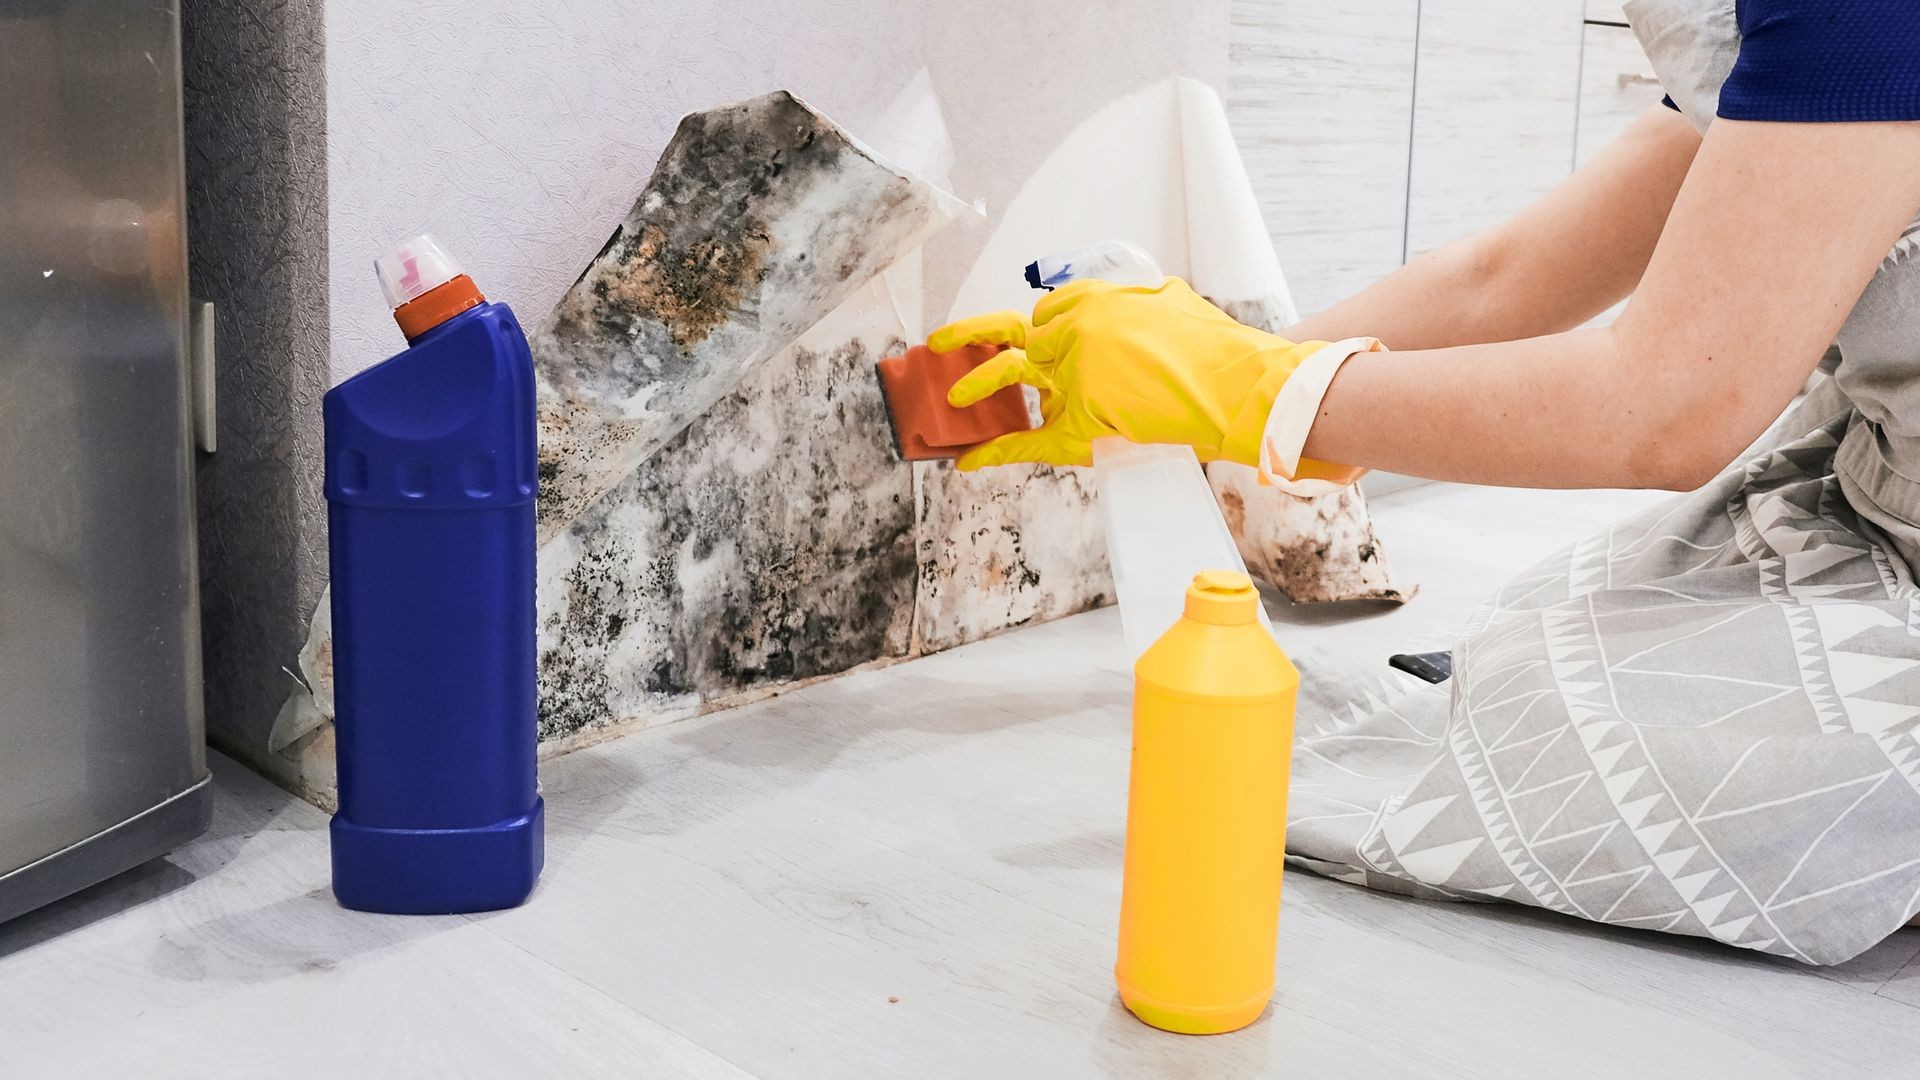 The Truth About Toxins from Mold and Mildew in Your Home